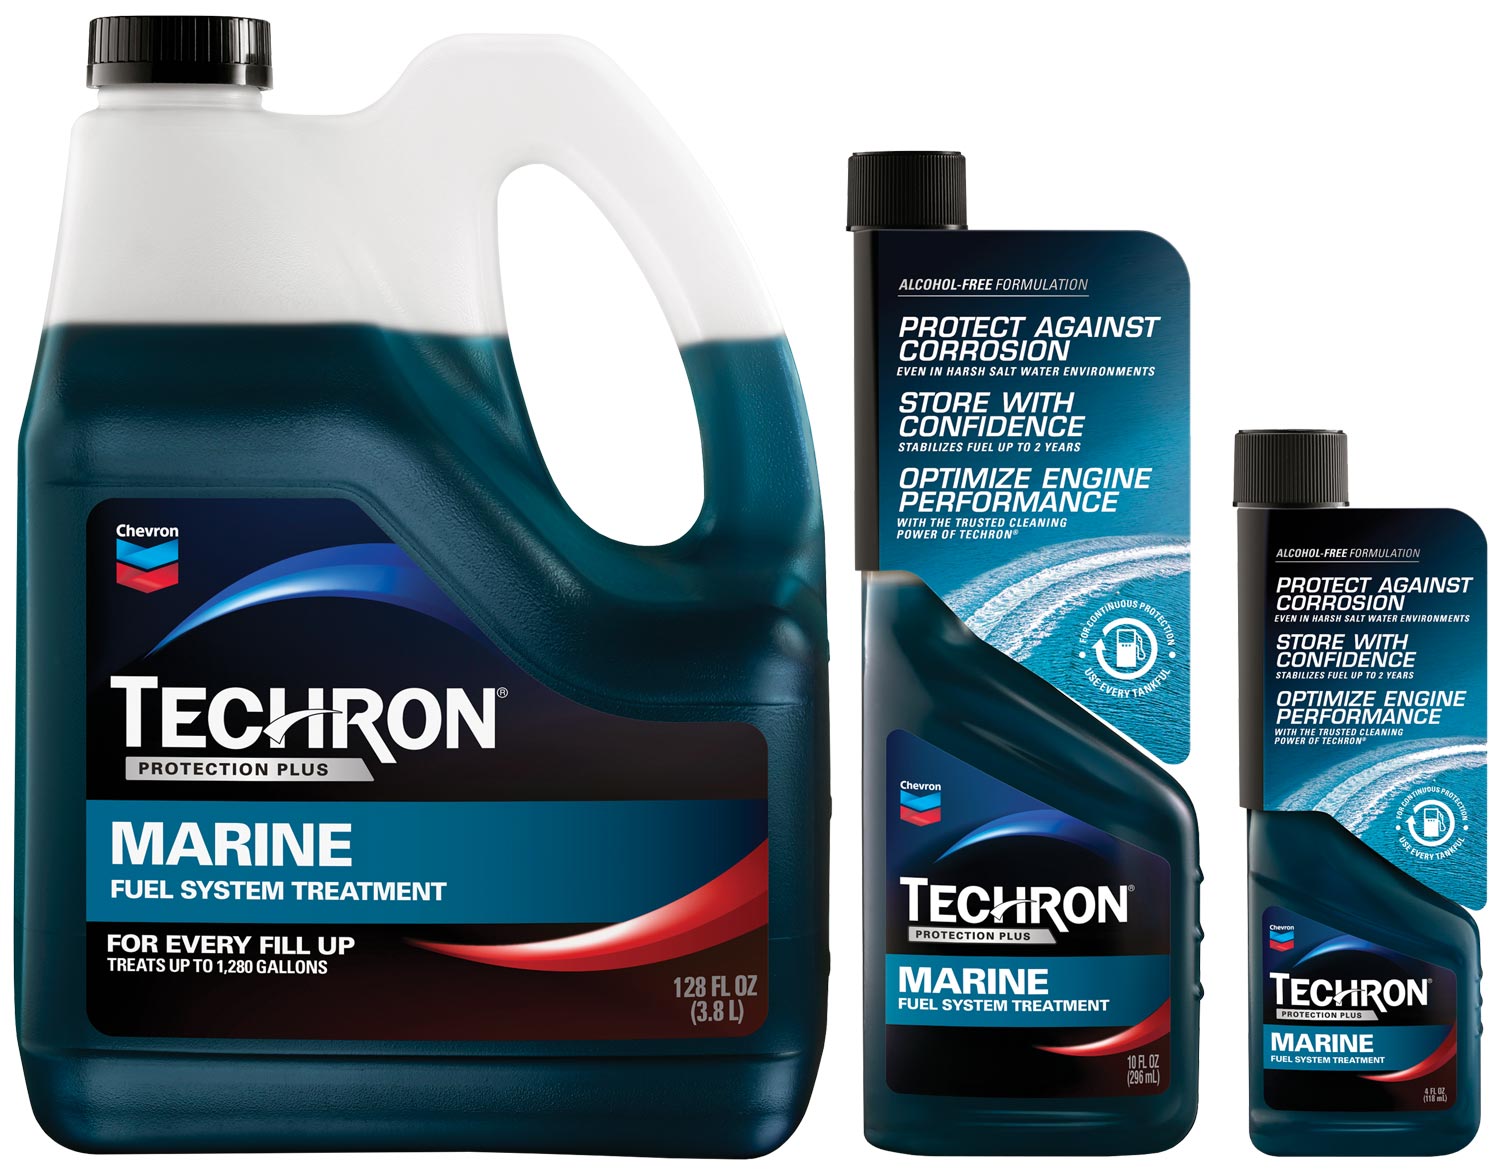 three containers from Techron's Marine Fuel System Treatment line